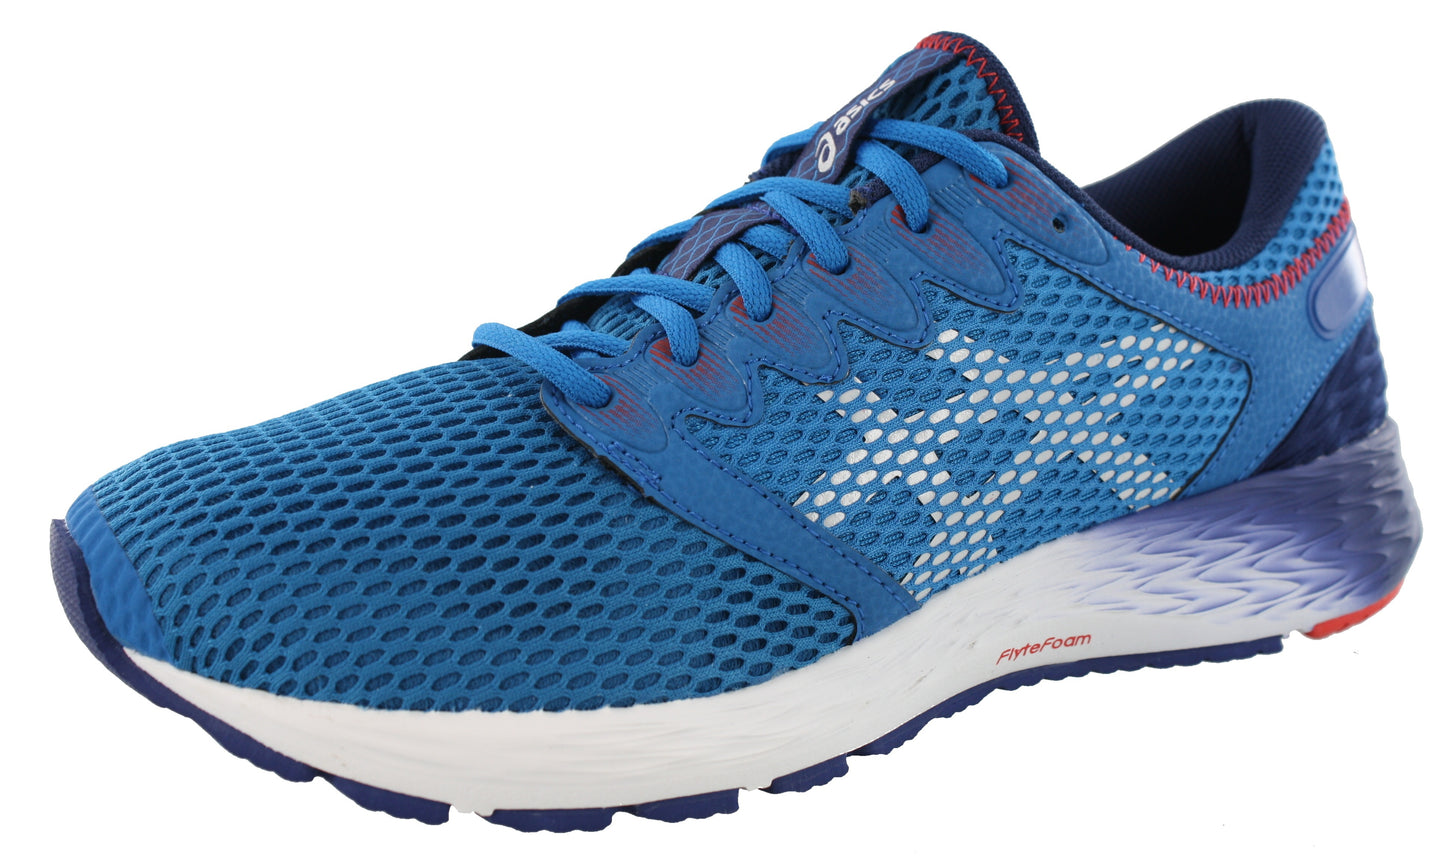 Lateral of Race Blue/White136 ASICS Men Walking Cushioned Running Shoes Roadhawk FF 2